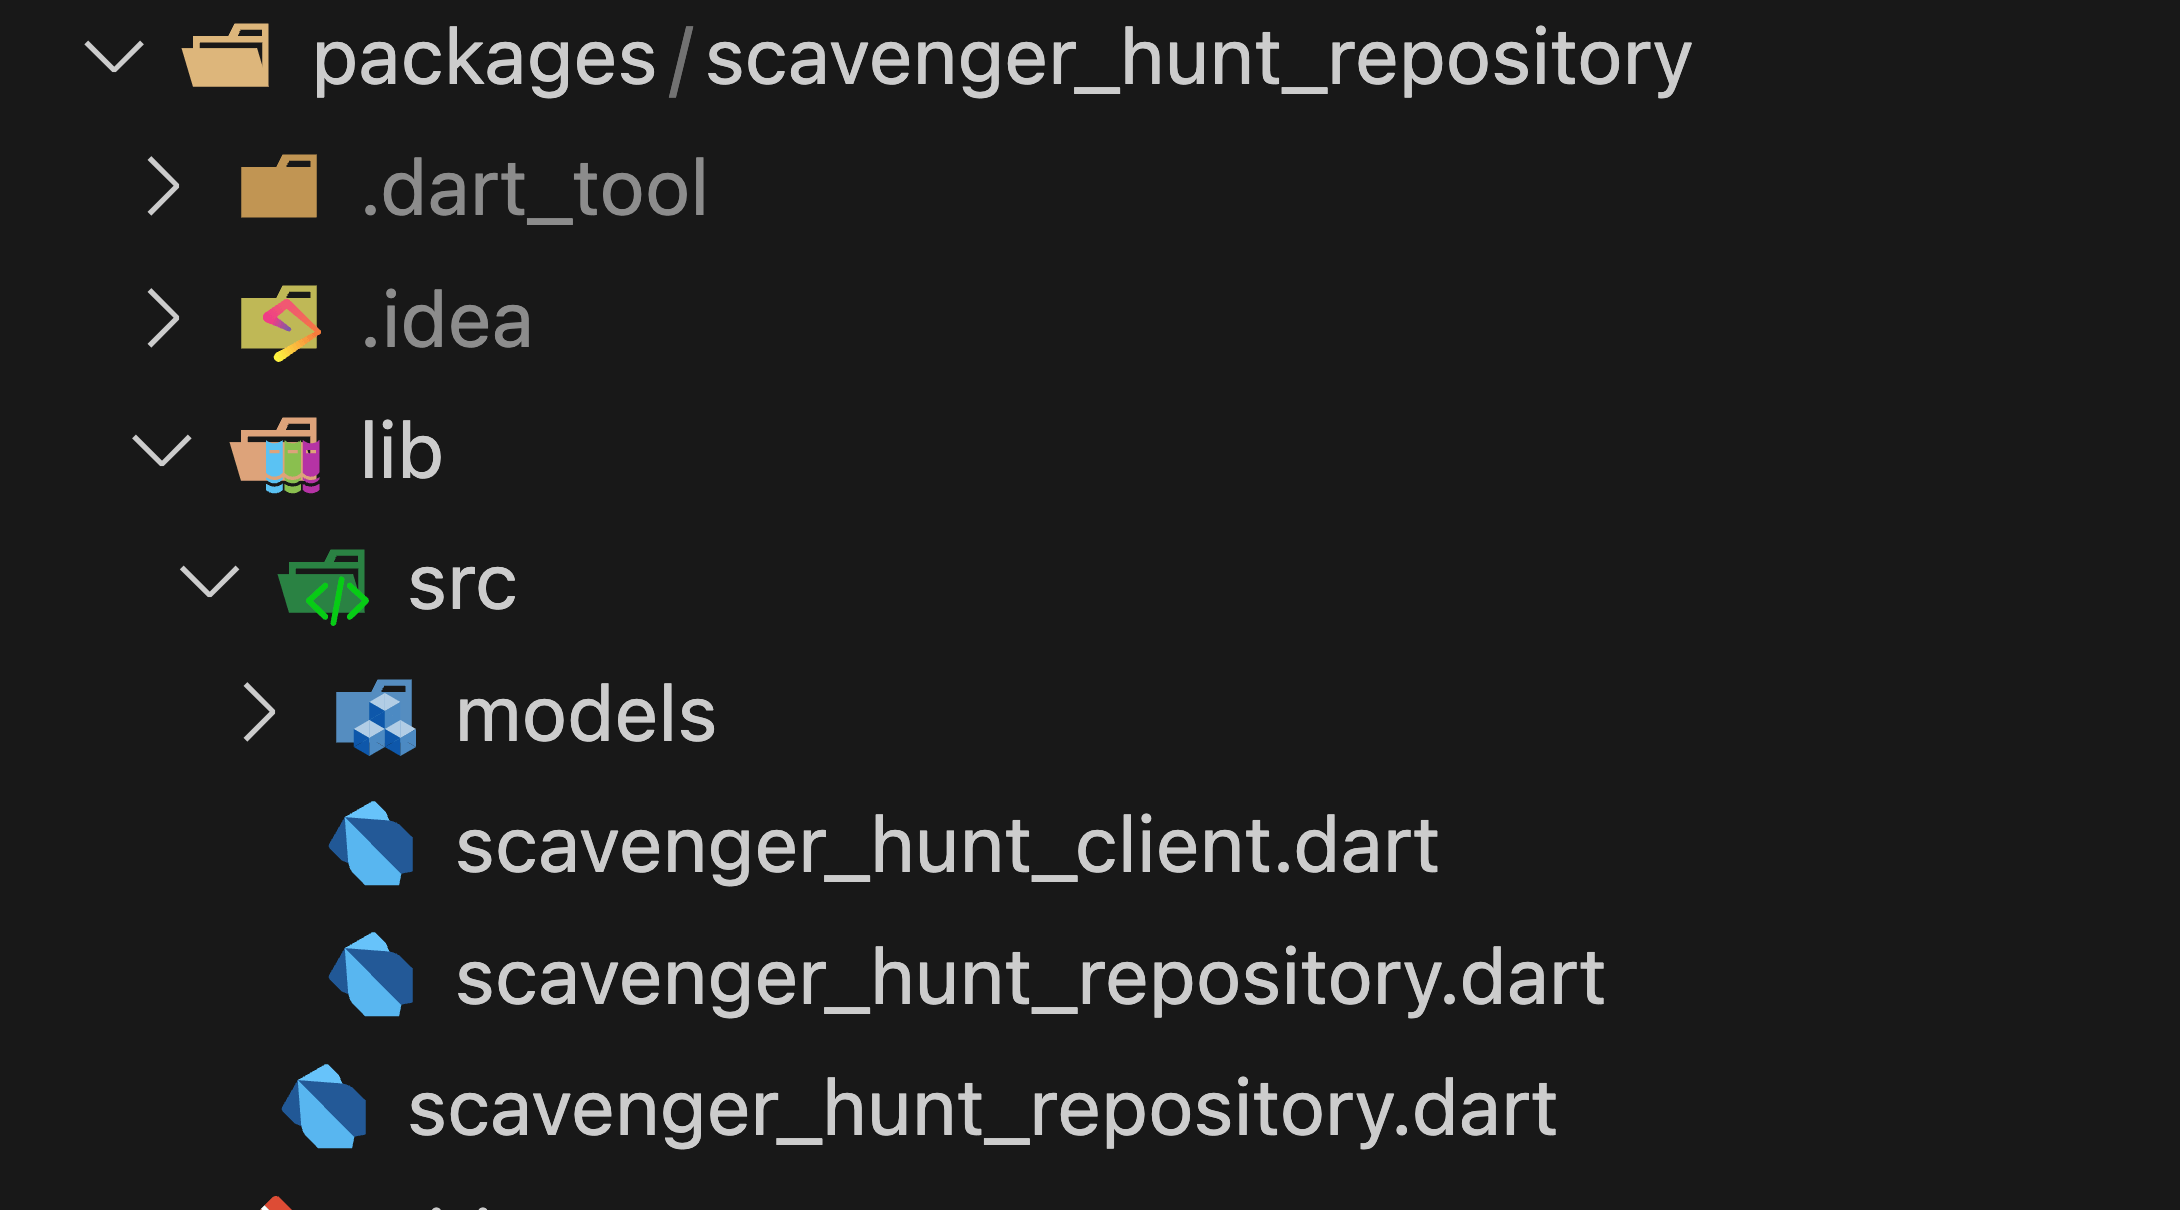 Scavenger hunt repository package structure